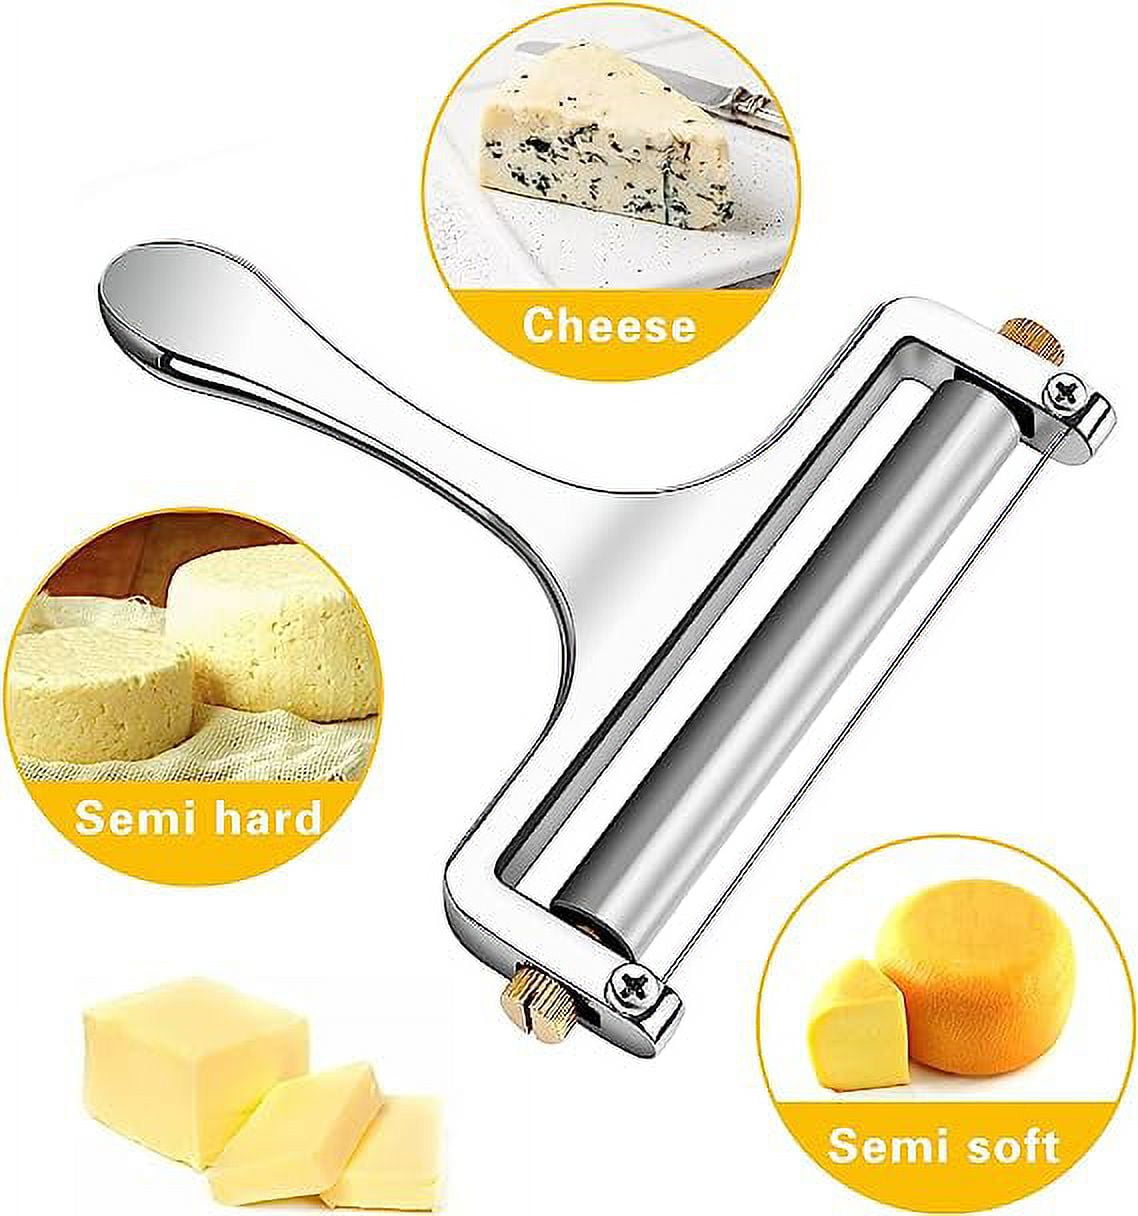 2 Pack Adjustable Wire Cheese Slicer Stainless Steel Thickness Cheese  Slicer Cutter replacement Kitchen Cooking Tool for Soft, Semi-hard, Hard  Cheeses